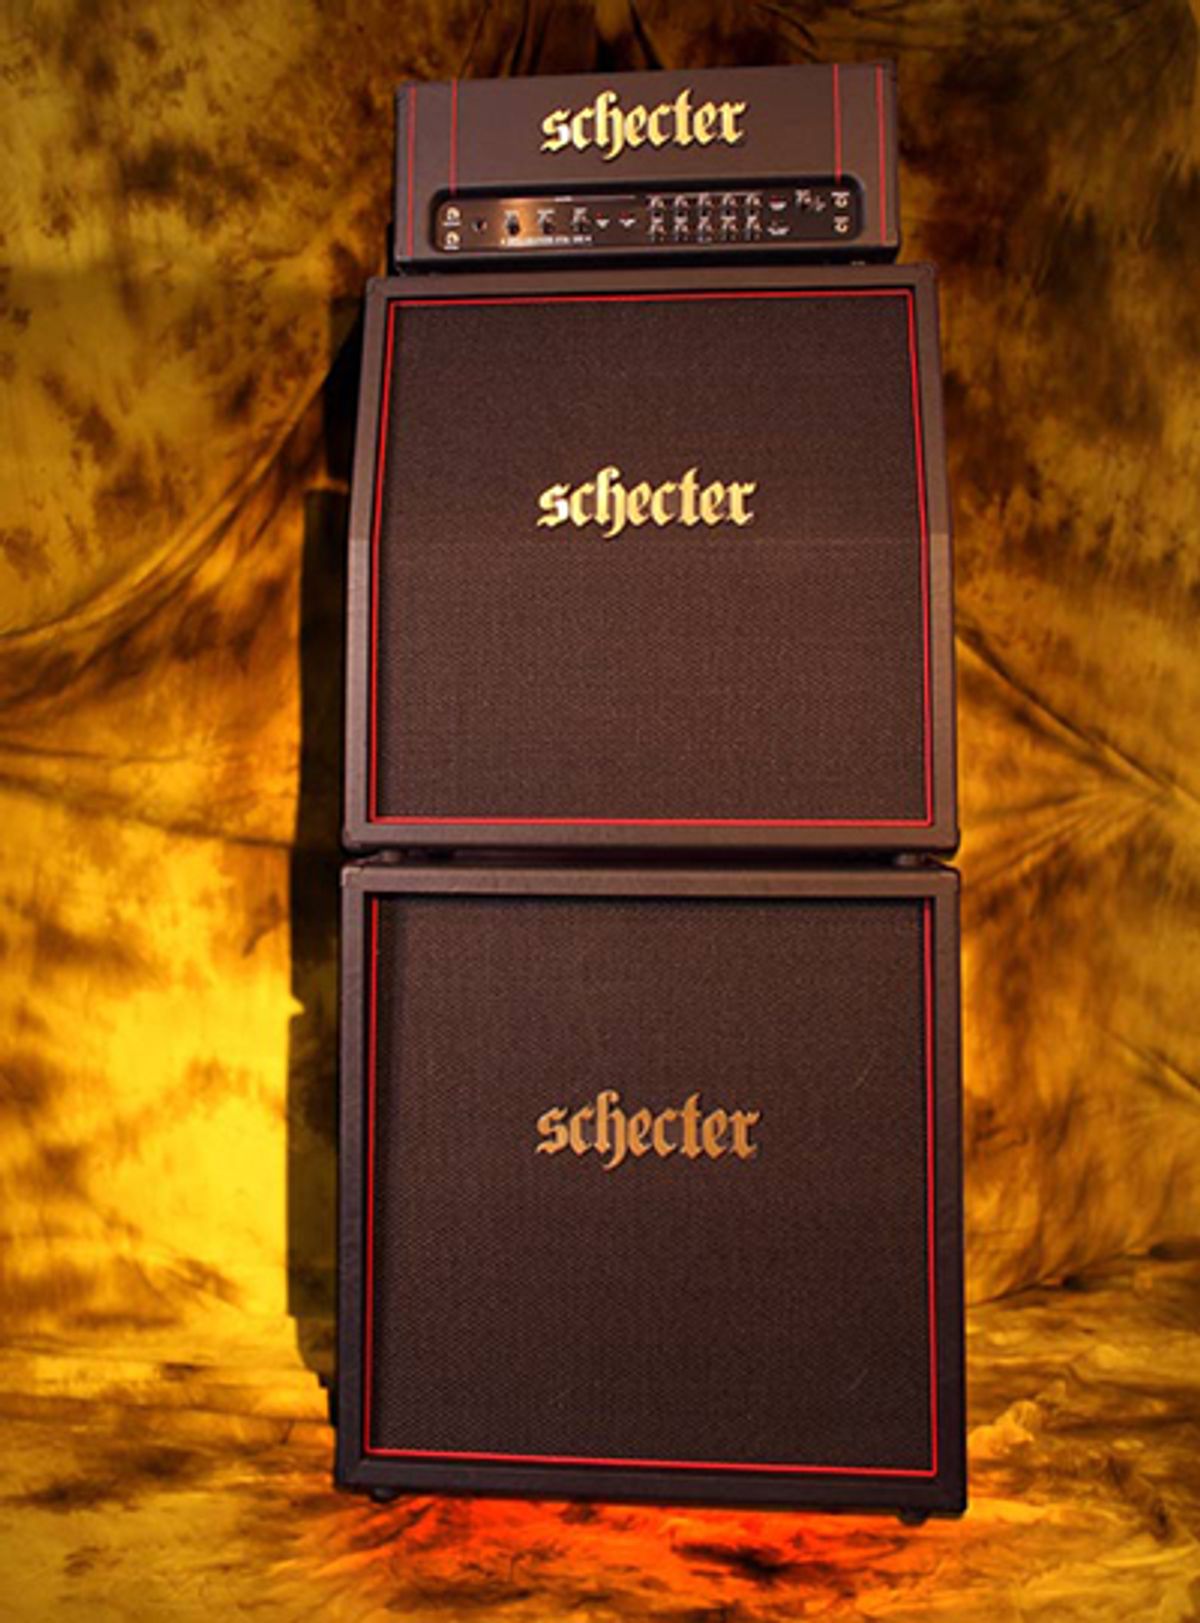 Schecter Releases Intial Details on Hellraiser Amps